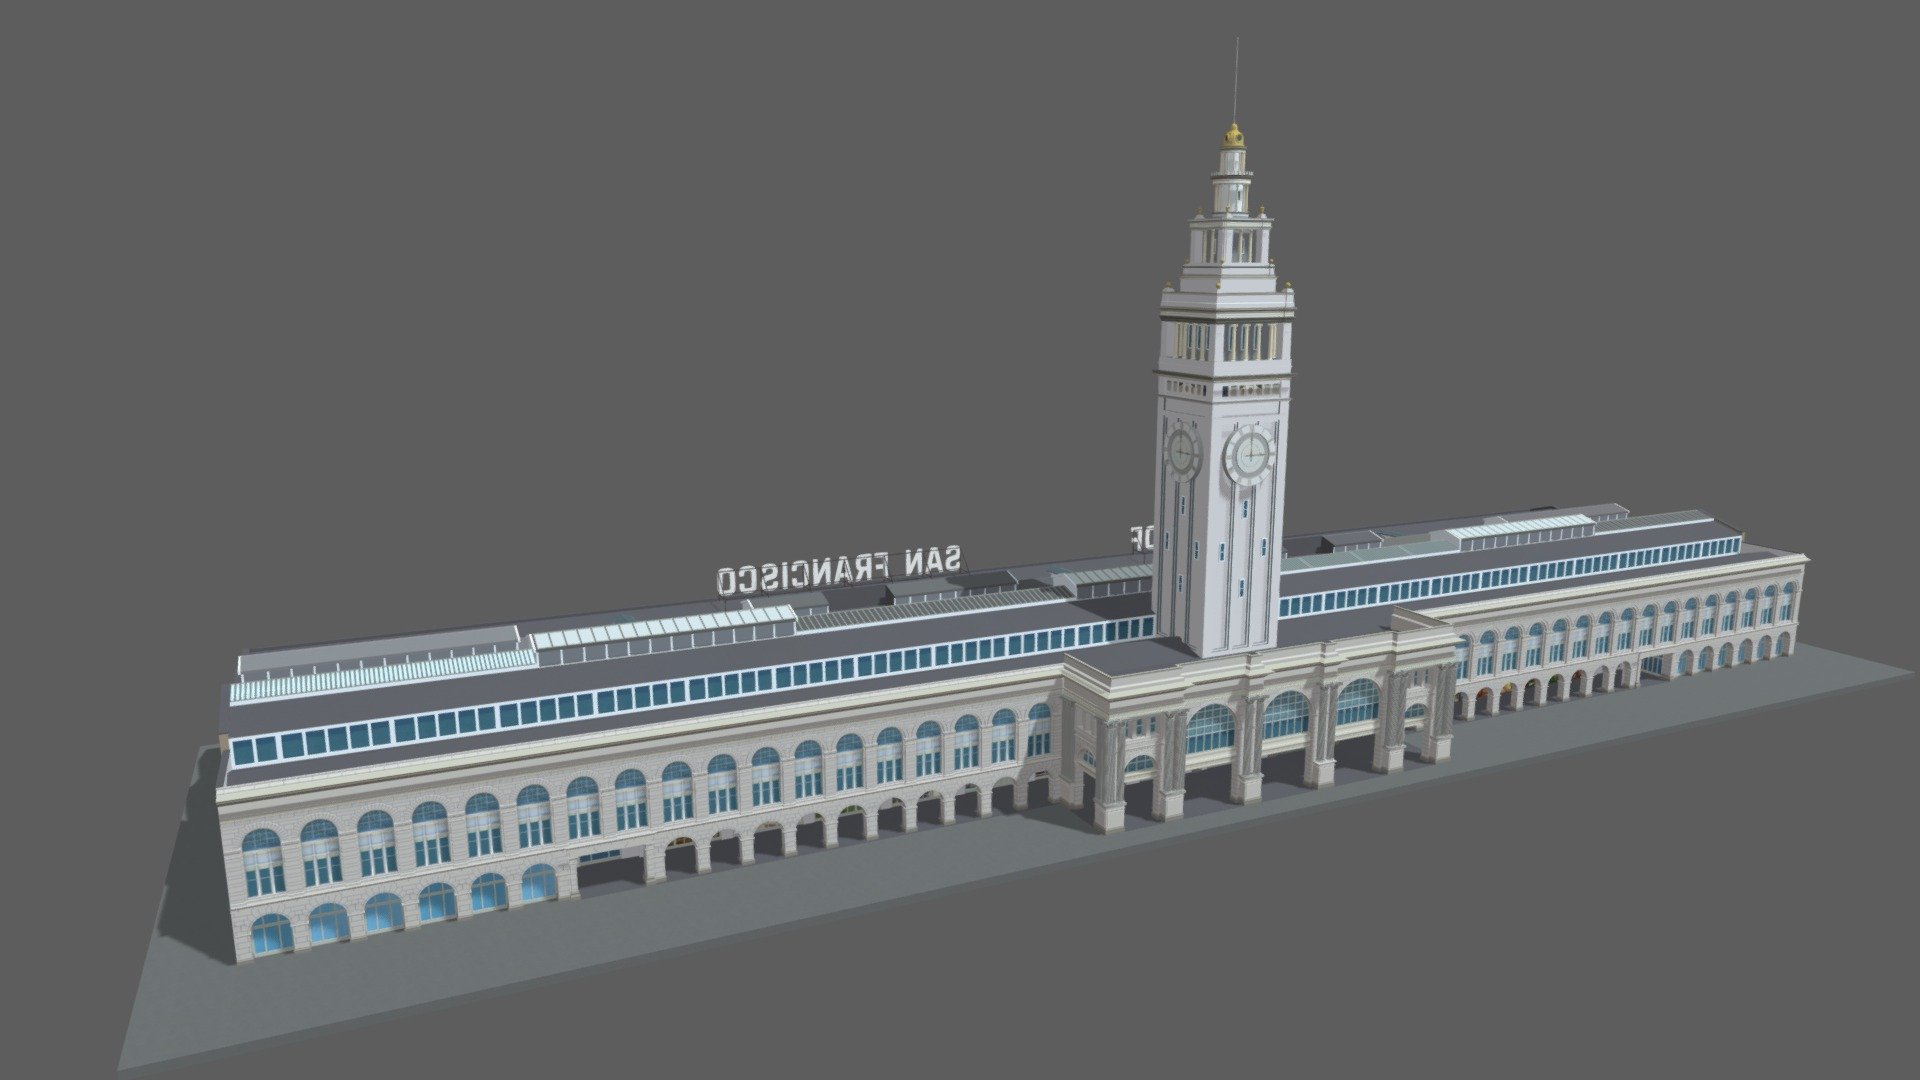 Ferry Building San Francisco
Originally created with 3ds Max 2015 and rendered in V-Ray 3.0

Total Poly Counts:
Poly Count = 177592
Vertex Count = 204451

https://nuralam3d.blogspot.com/2022/10/ferry-building-san-francisco.html - Ferry Building San Francisco - 3D model by nuralam018 3d model